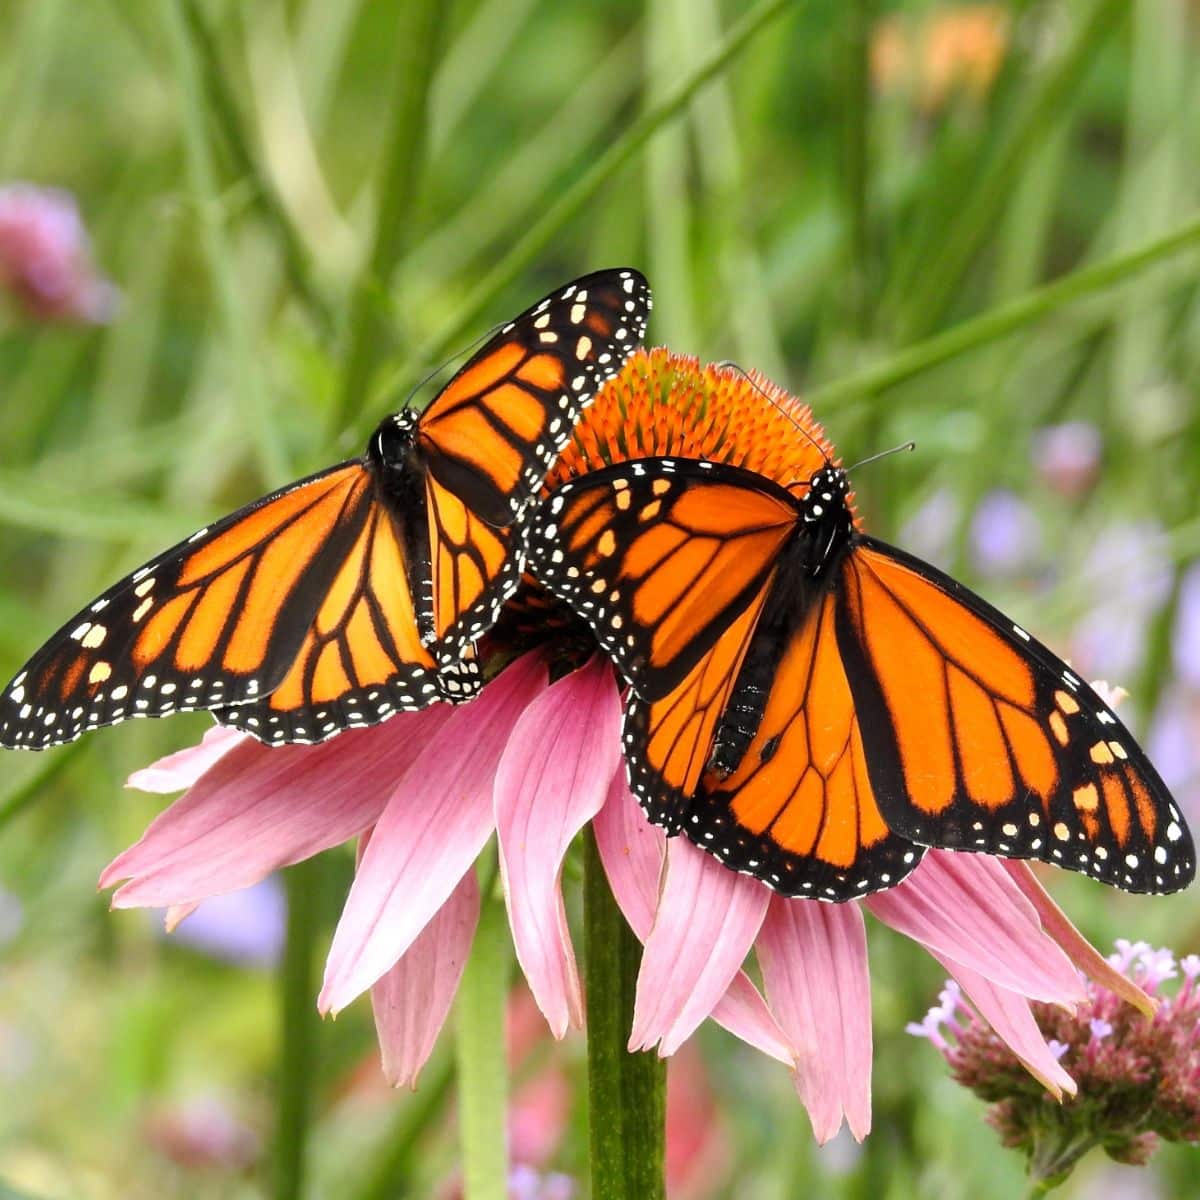 Spiritual meaning of monarch butterfly